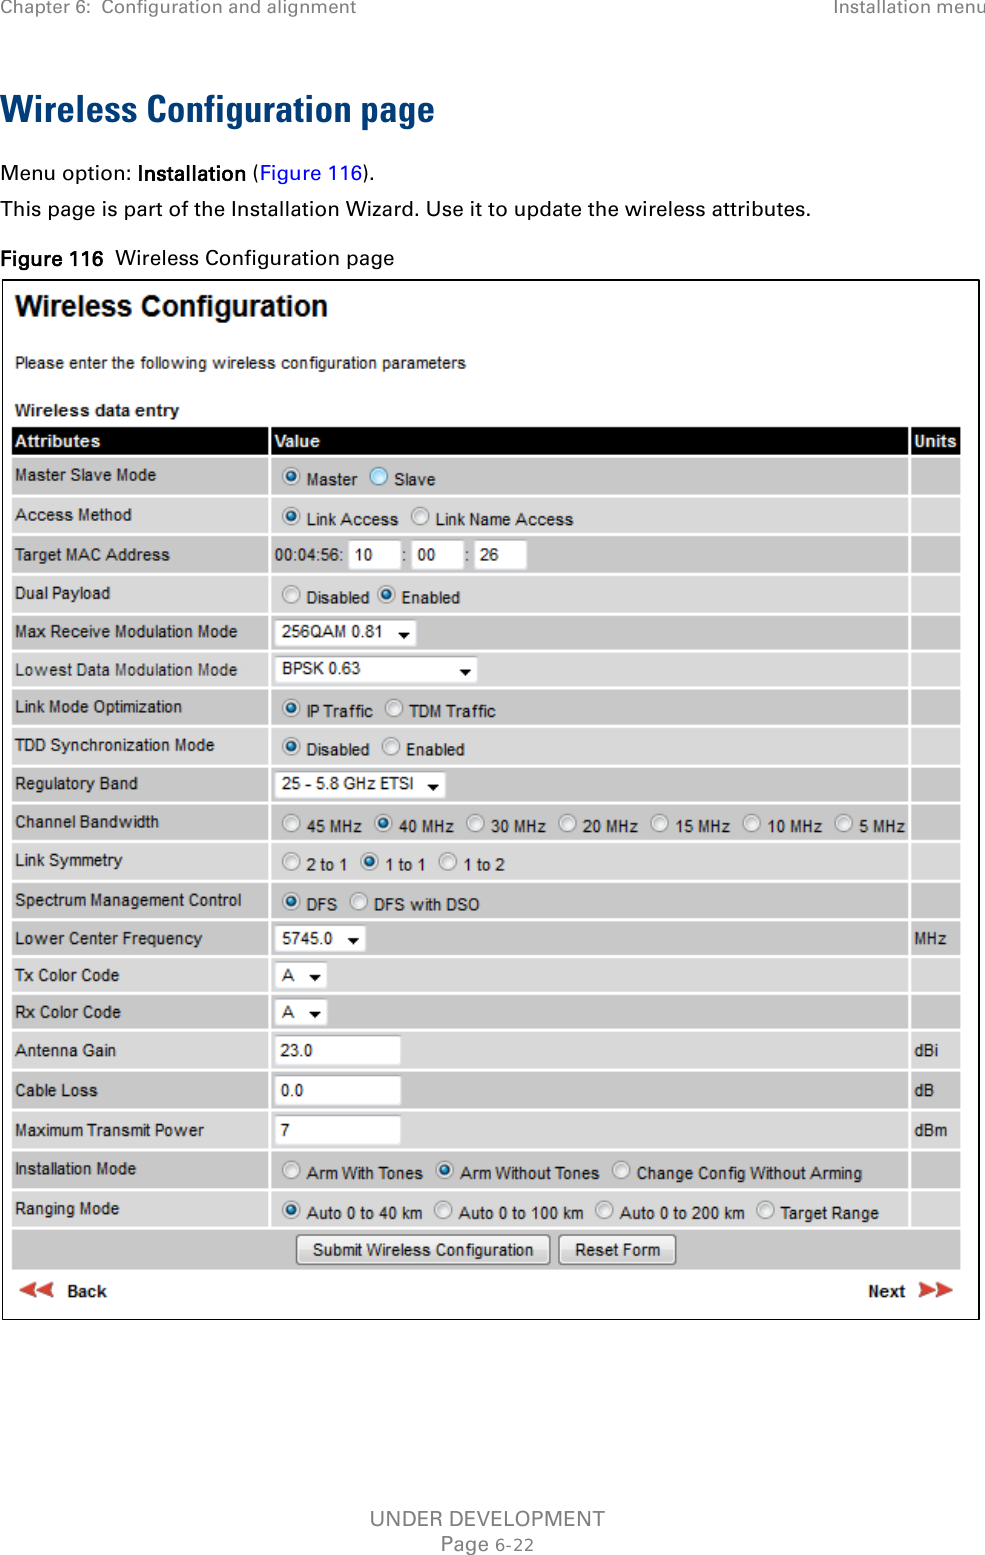 Chapter 6:  Configuration and alignment Installation menu  Wireless Configuration page Menu option: Installation (Figure 116). This page is part of the Installation Wizard. Use it to update the wireless attributes. Figure 116  Wireless Configuration page    UNDER DEVELOPMENT Page 6-22 